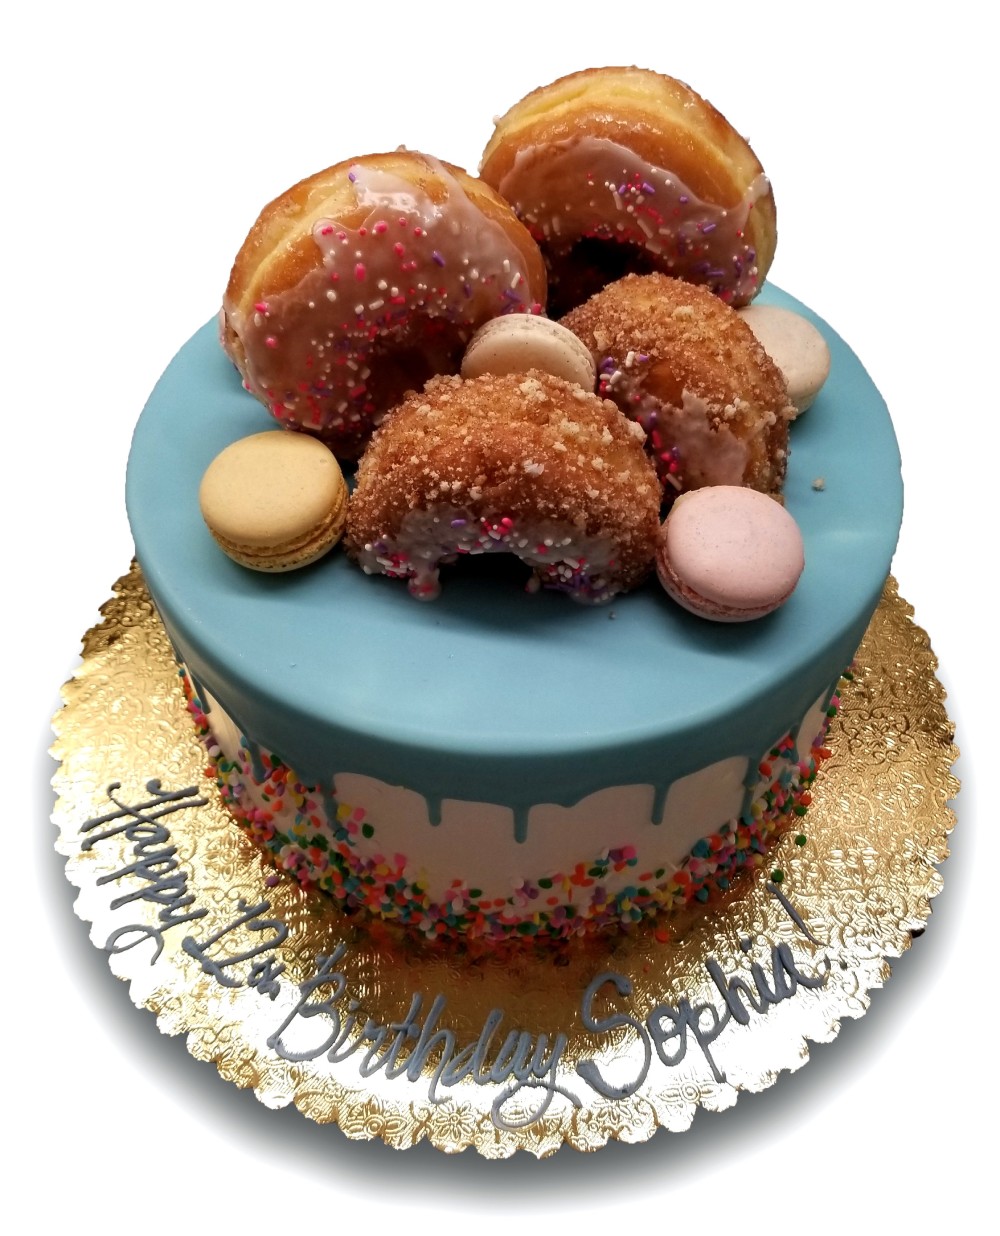 Donut and macaron cake with dripping blue chocolate and sprinkles